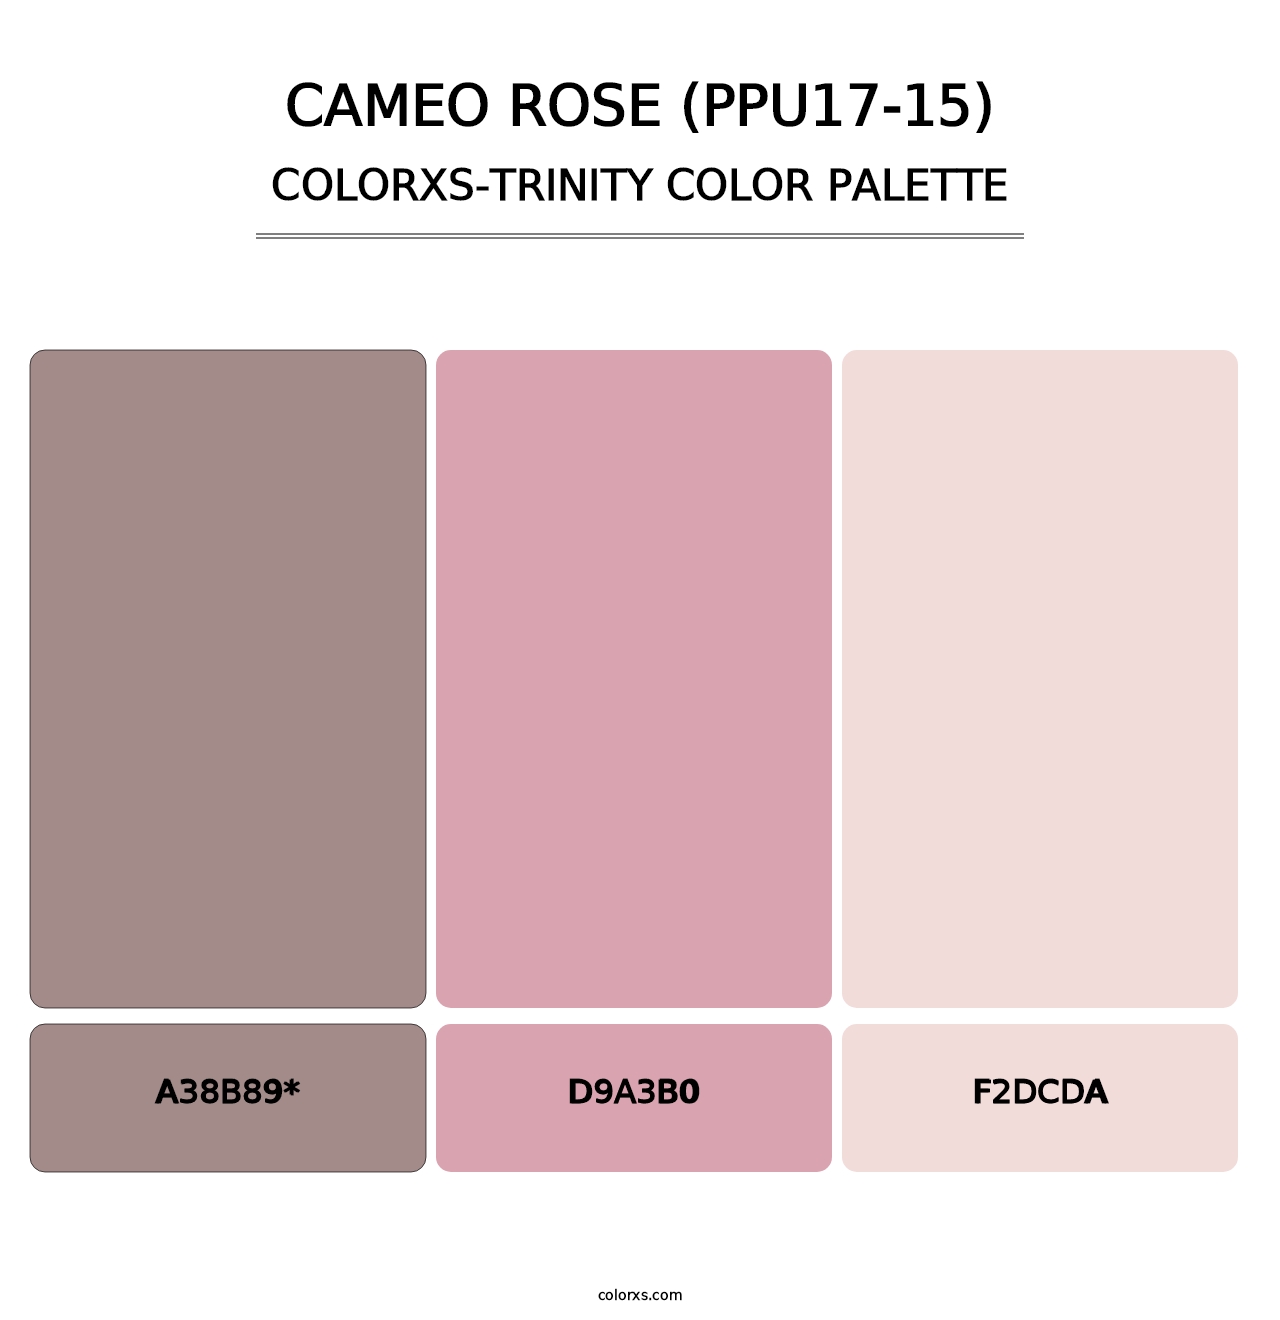 Cameo Rose (PPU17-15) - Colorxs Trinity Palette